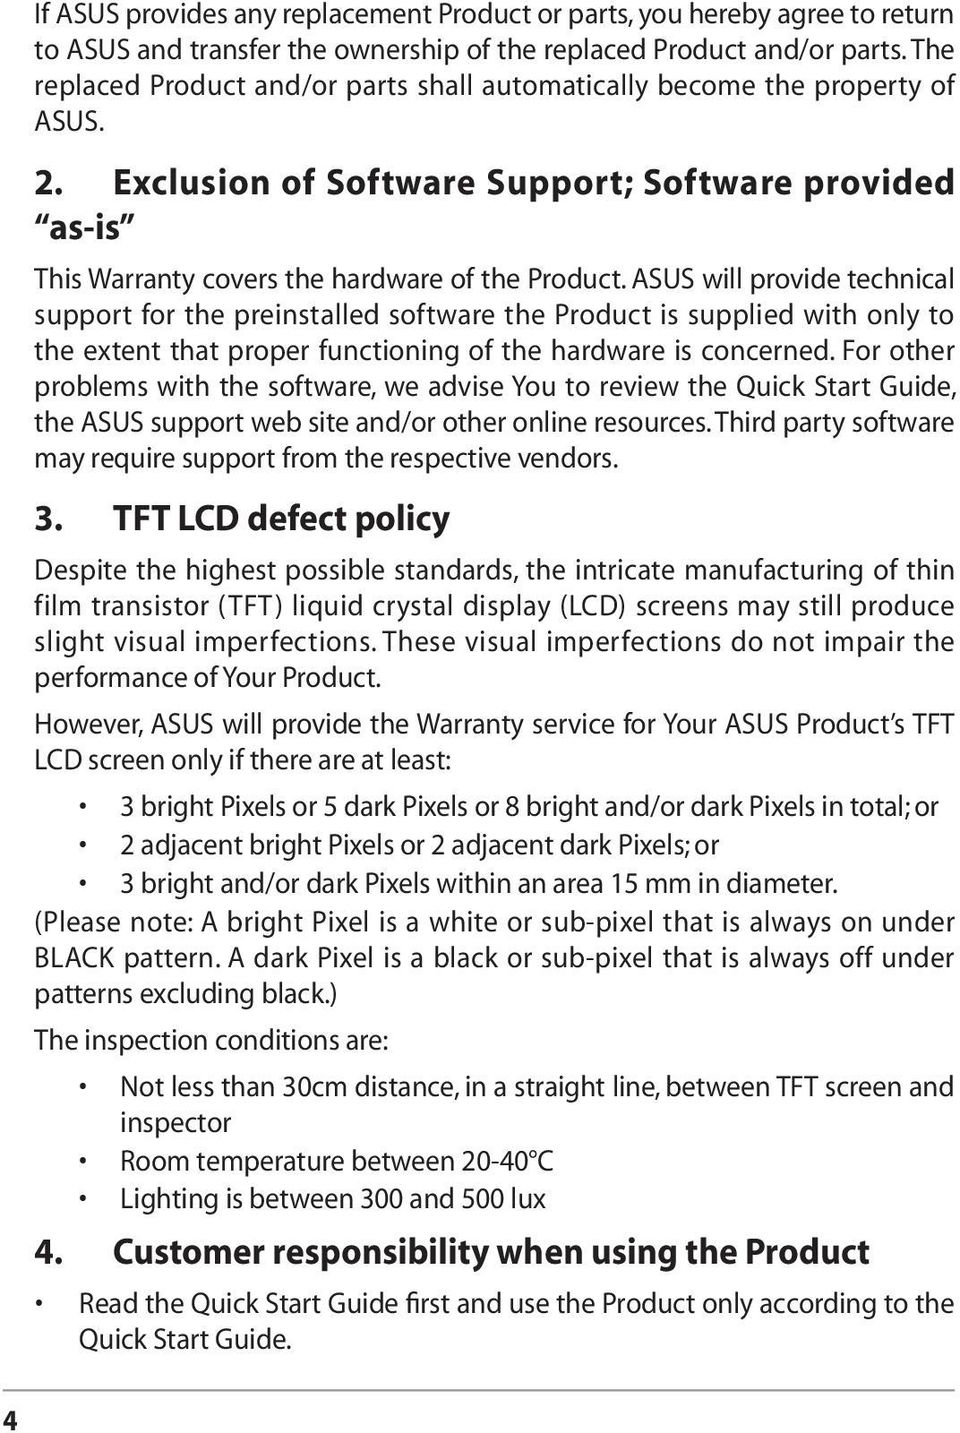 ASUS will provide technical support for the preinstalled software the Product is supplied with only to the extent that proper functioning of the hardware is concerned.